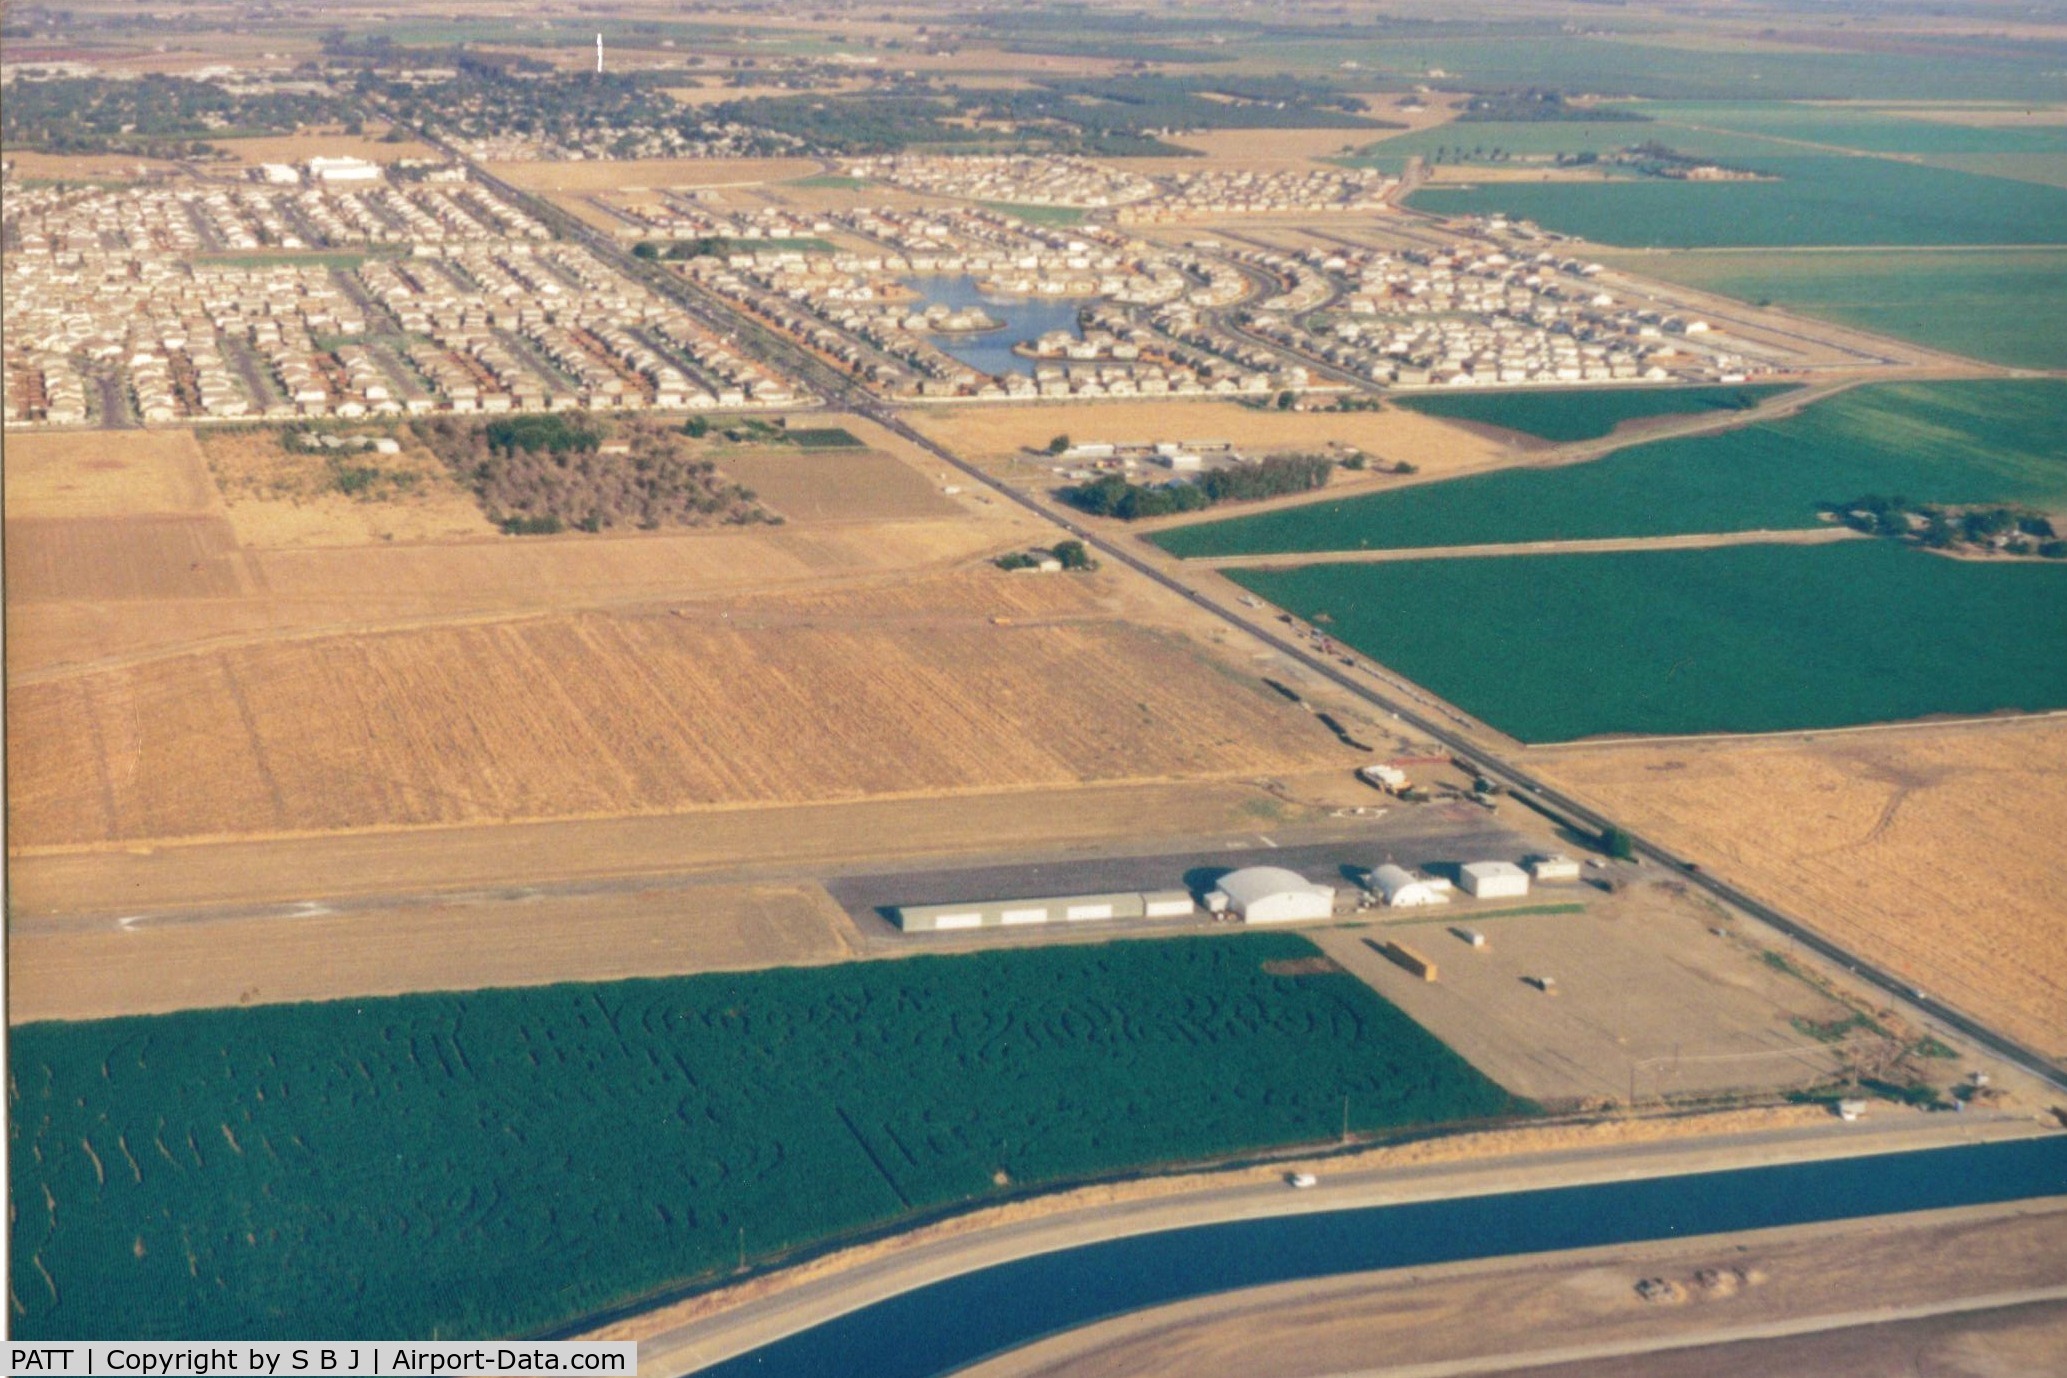 PATT Airport - Patterson airport in Patterson,Calif. A private Ag airport that is being over run by development.Closed as of 2014.Homes are much closer then when this picture was taken.View is east.